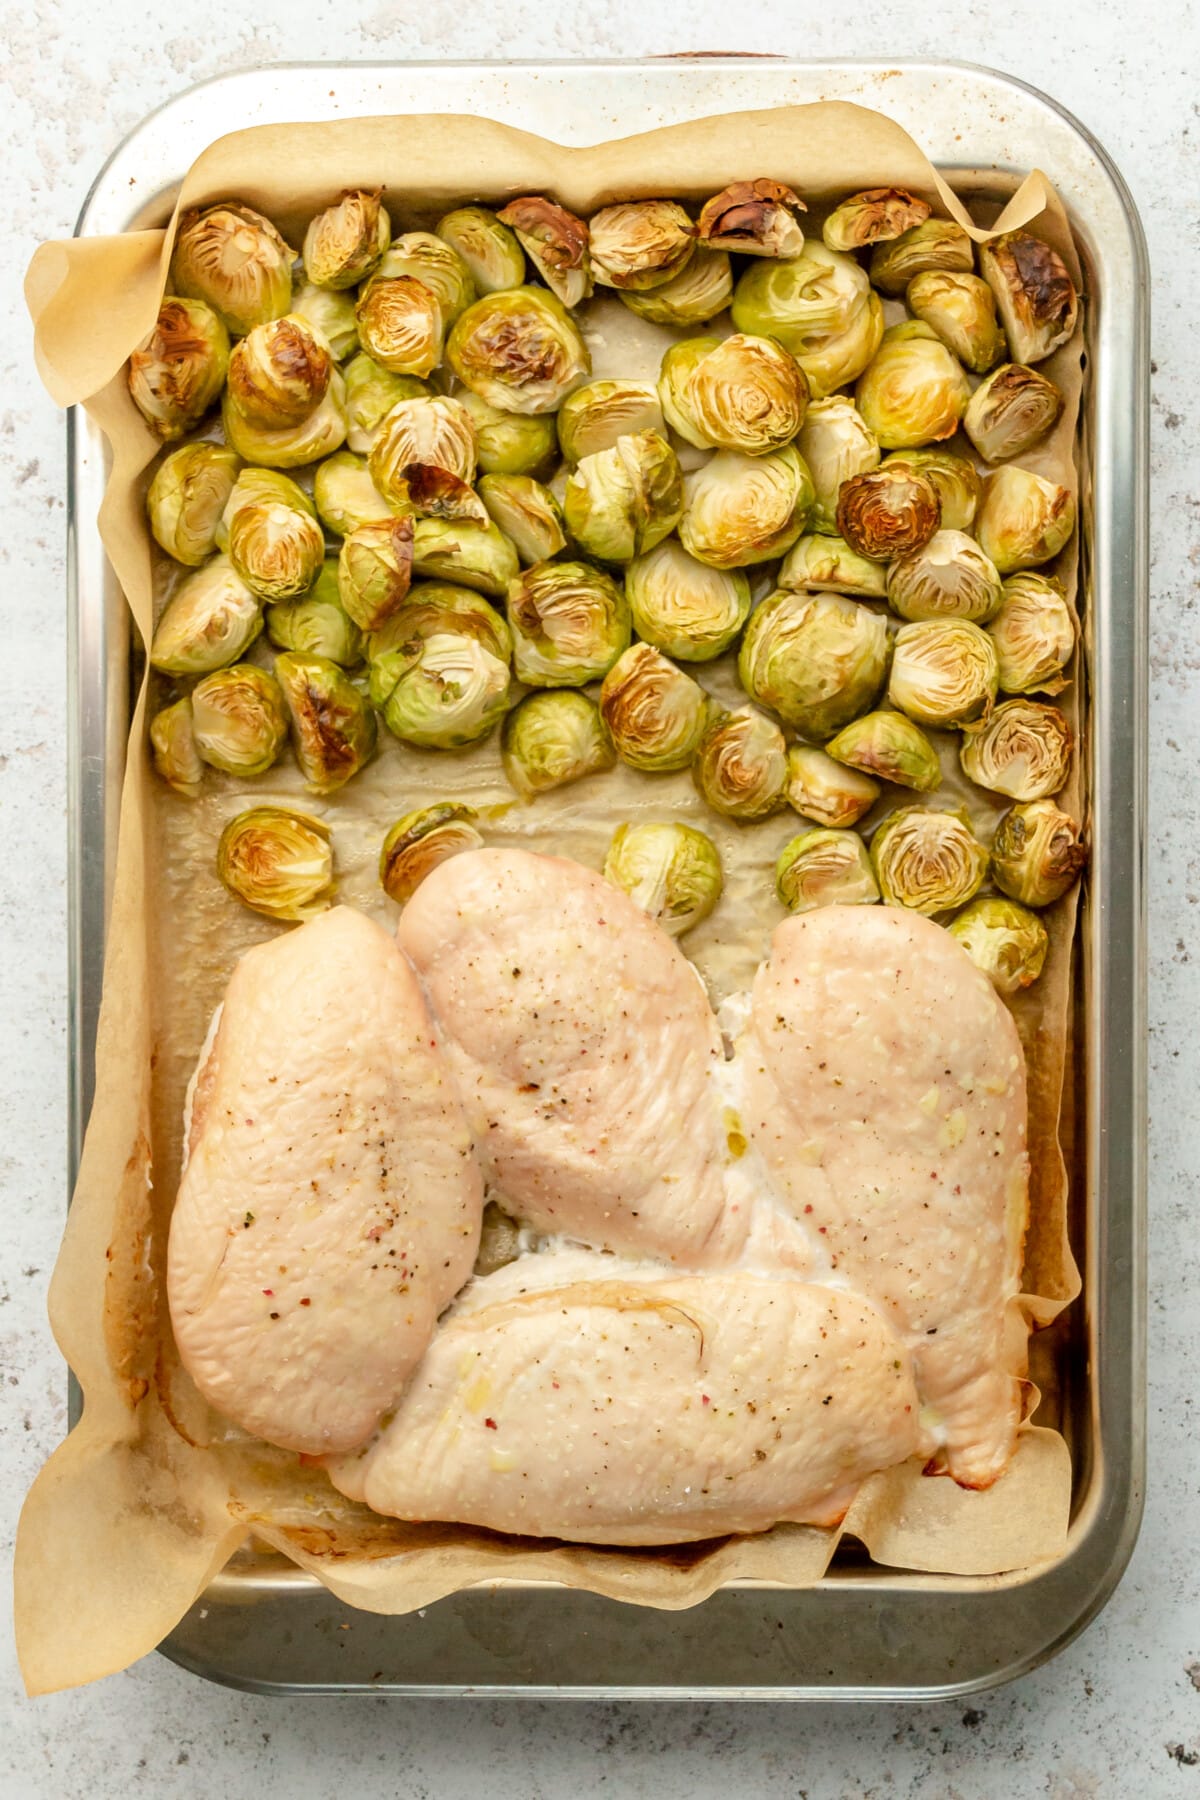 Baked chicken breasts and brussel sprouts sit on a lined rimmed baking sheet on a light grey surface.